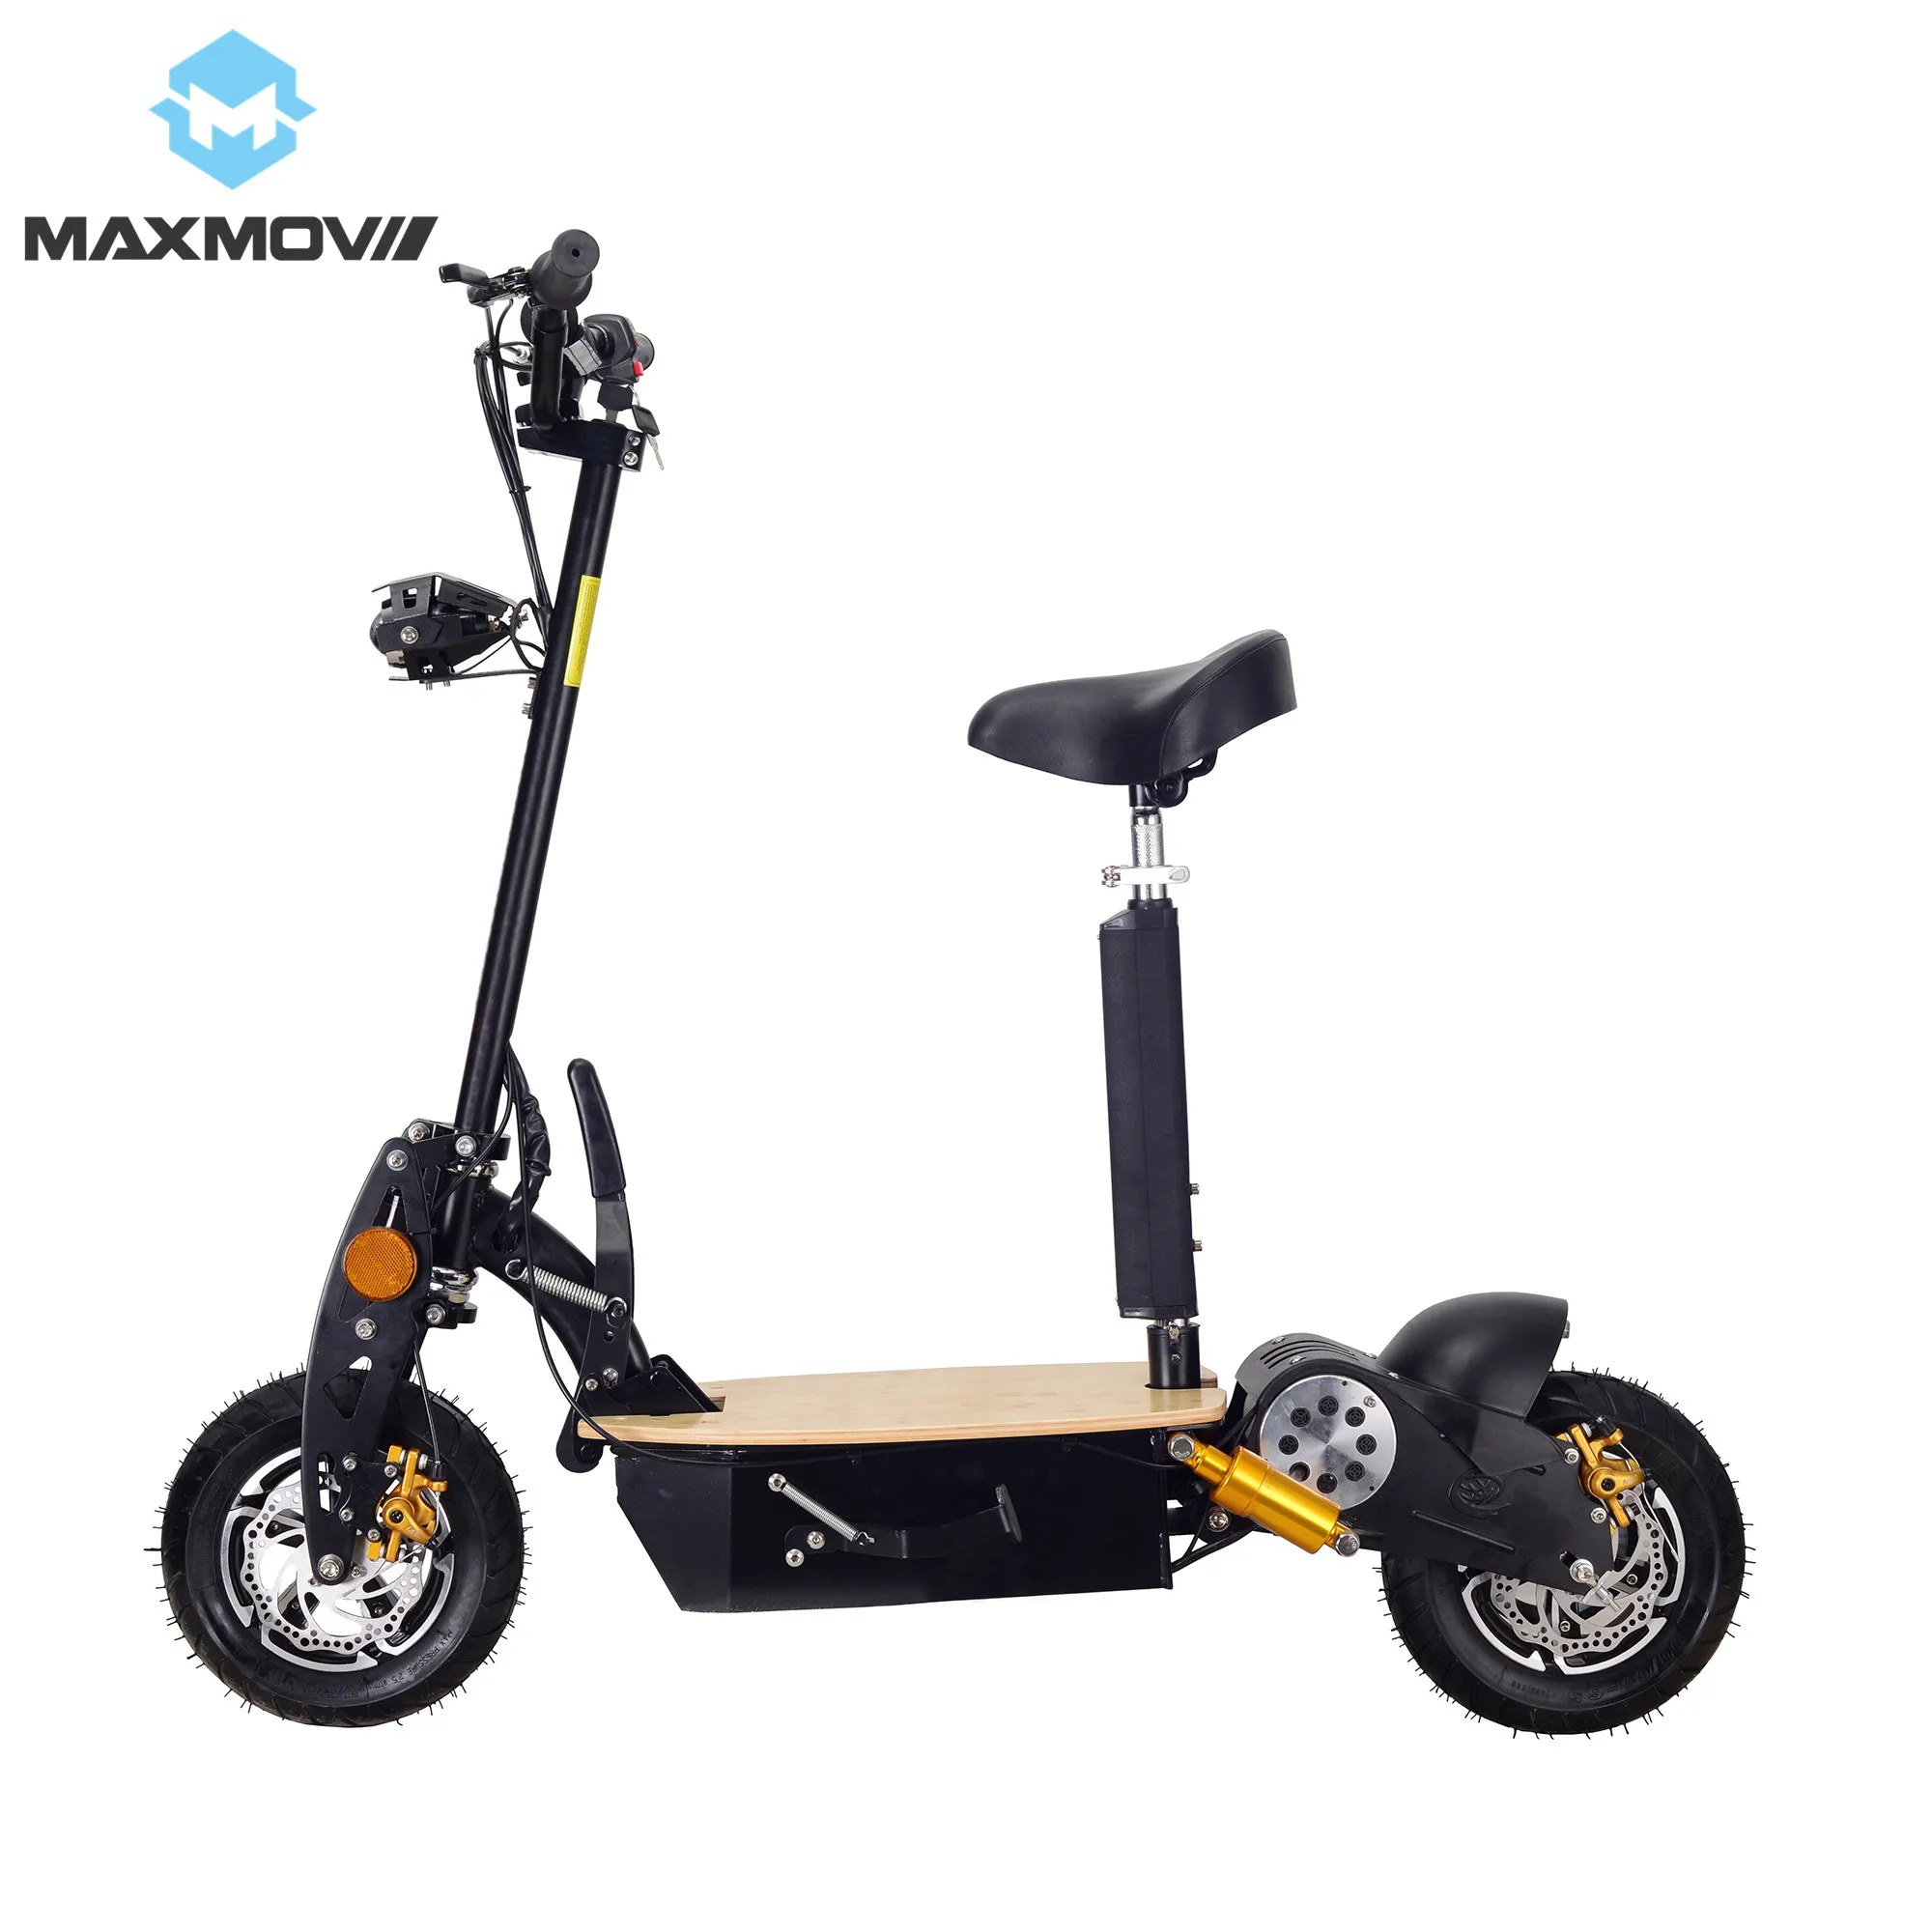 Perfect 2000W 60V Adult Foldable Two Wheel Off-road Electric Scooter with Front and Rear LED Lights 1